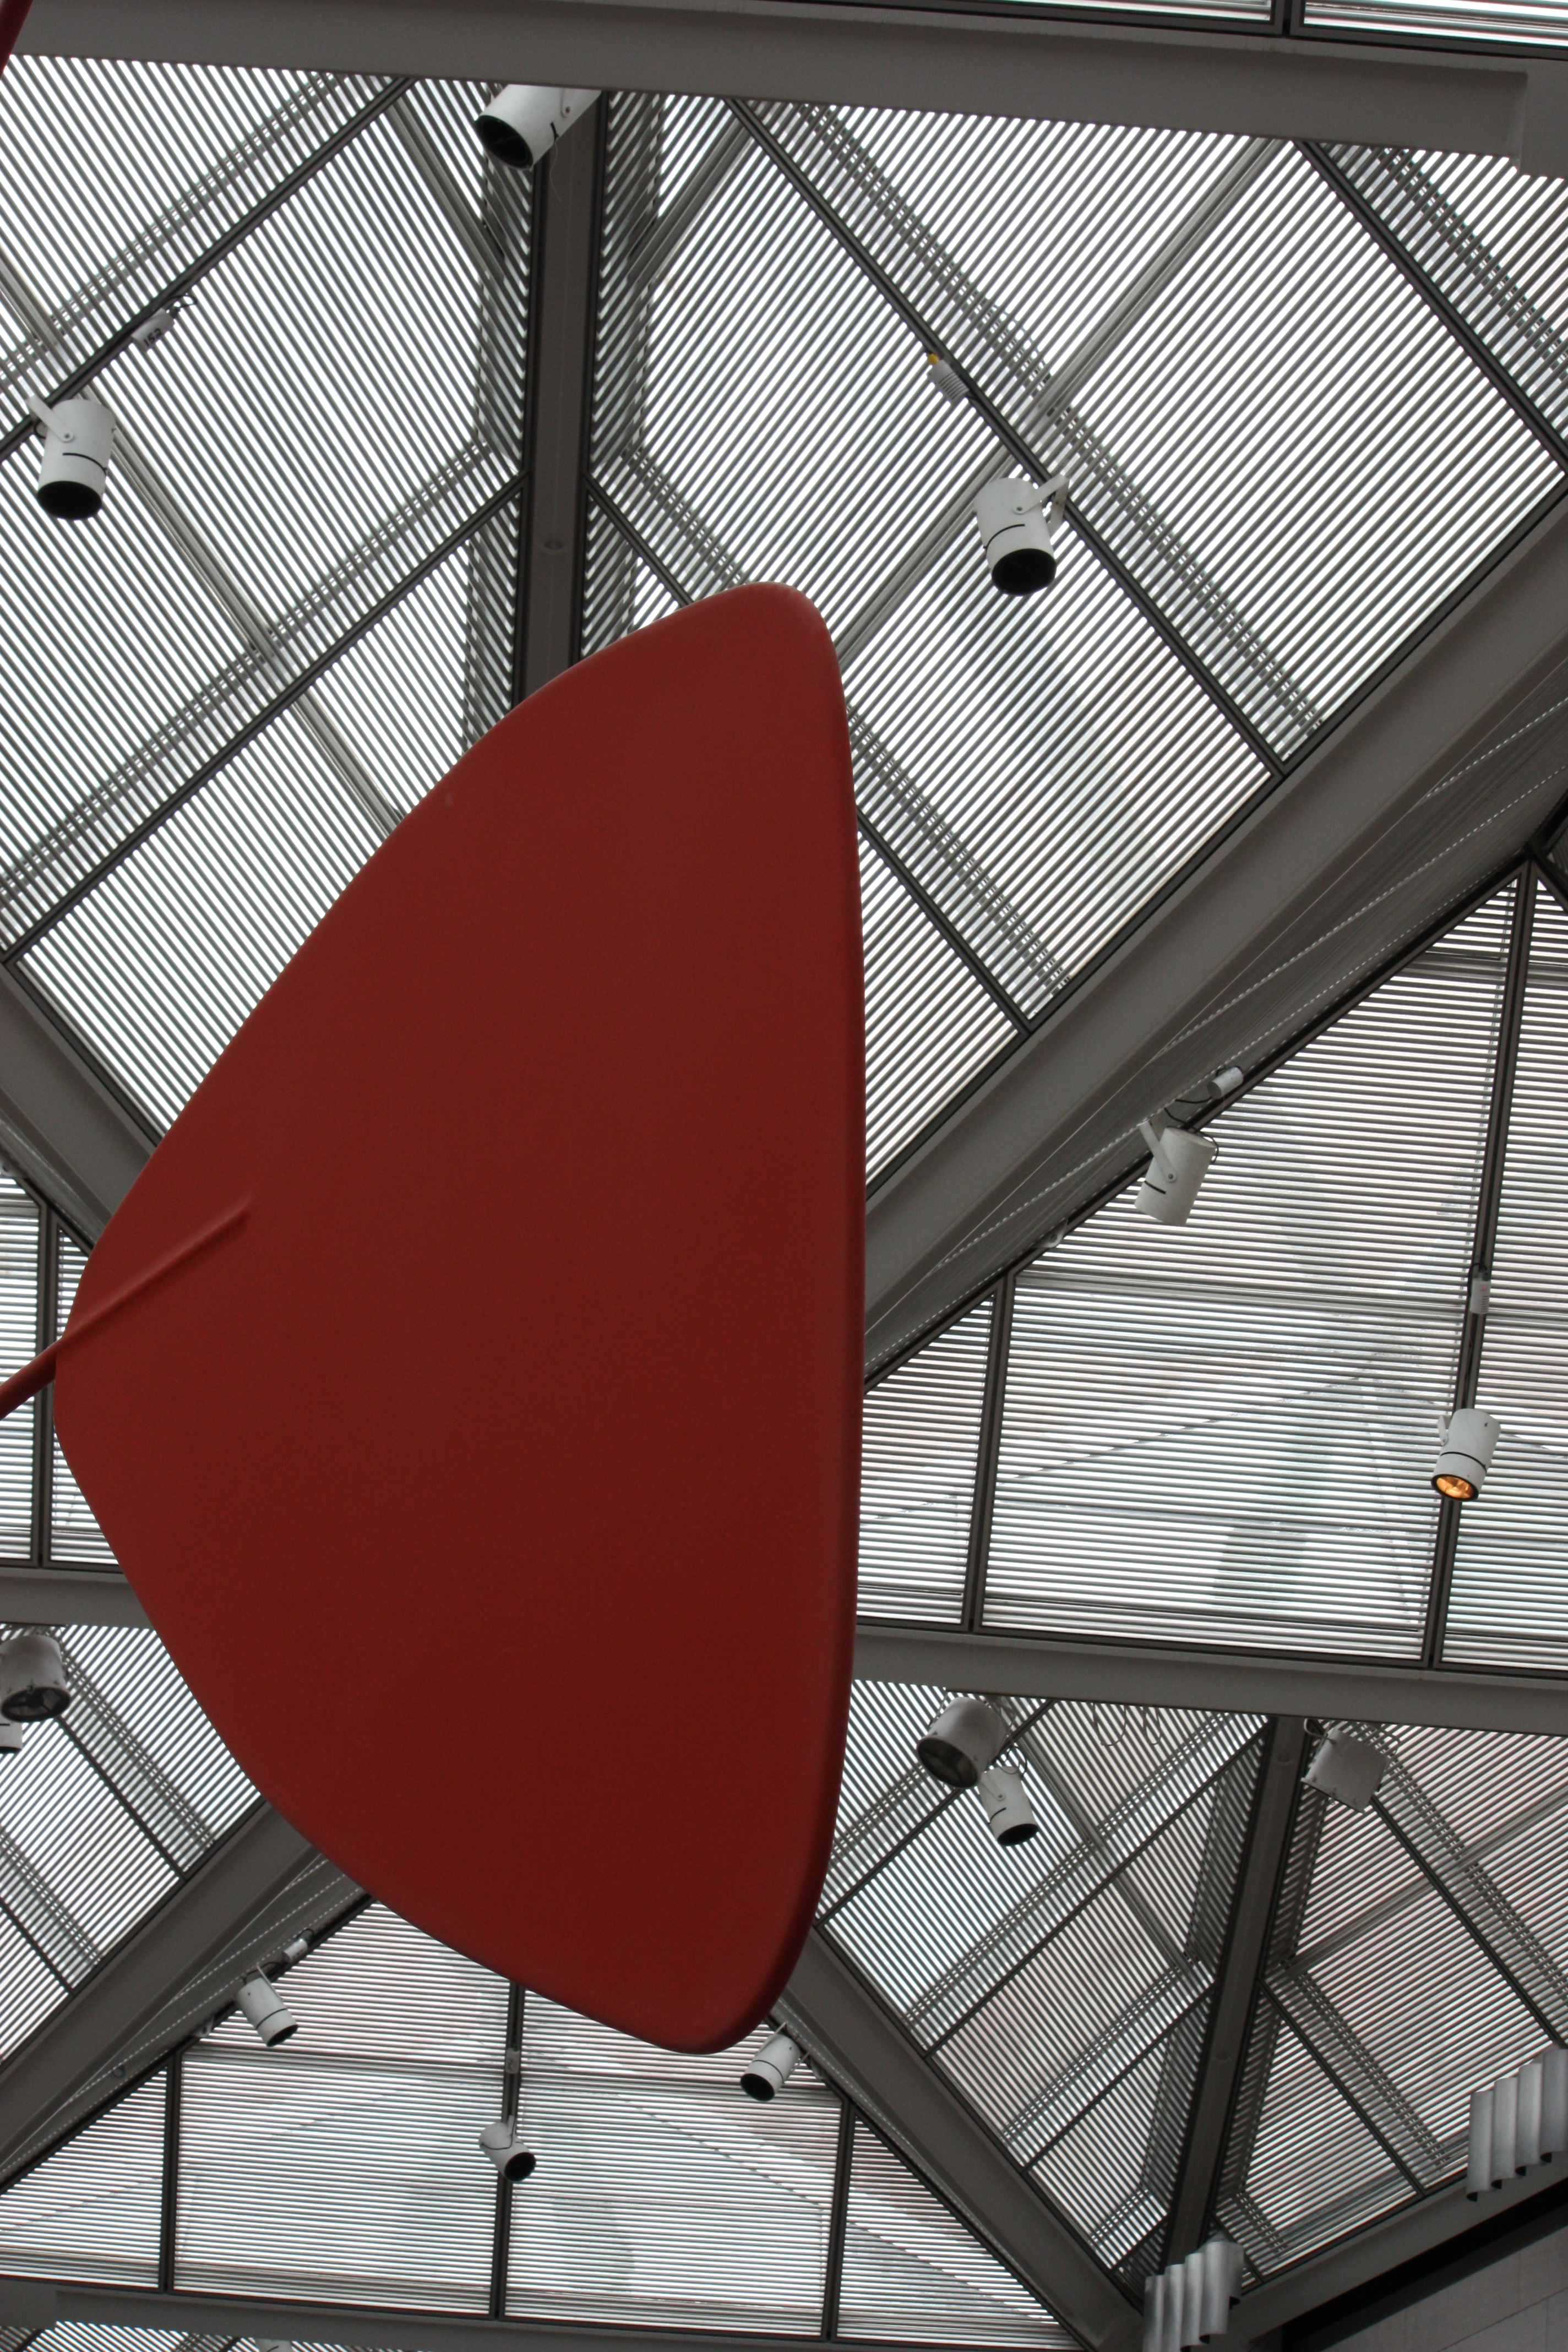 Alexander Calder mobile in the East wing of the National Gallery of Art